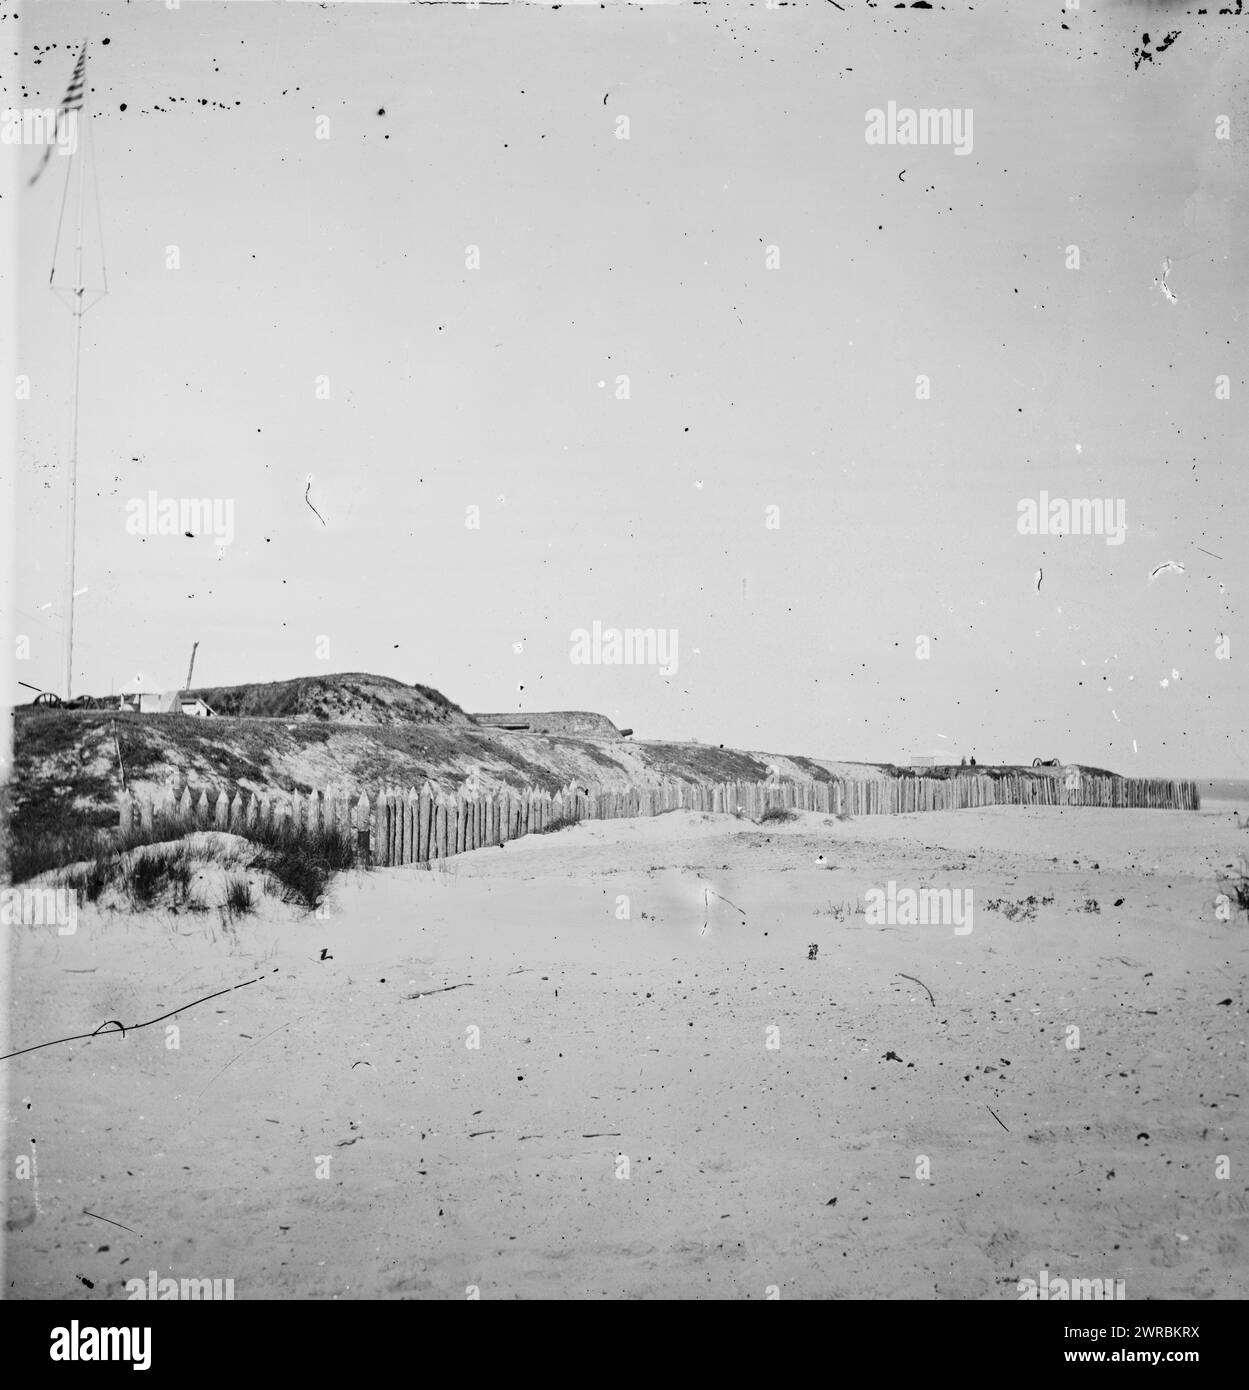 Charleston, South Carolina (vicinity). View of Forts Wagner & Gregg on Morris Island, evacuated by Confederates, September 6, 1863, Cooley, Sam A. (Samuel A.), photographer, 1865., United States, History, Civil War, 1861-1865, Glass negatives, 1860-1870., Stereographs, 1860-1870, Glass negatives, 1860-1870, 1 negative (2 plates): glass, stereograph, wet collodion Stock Photo